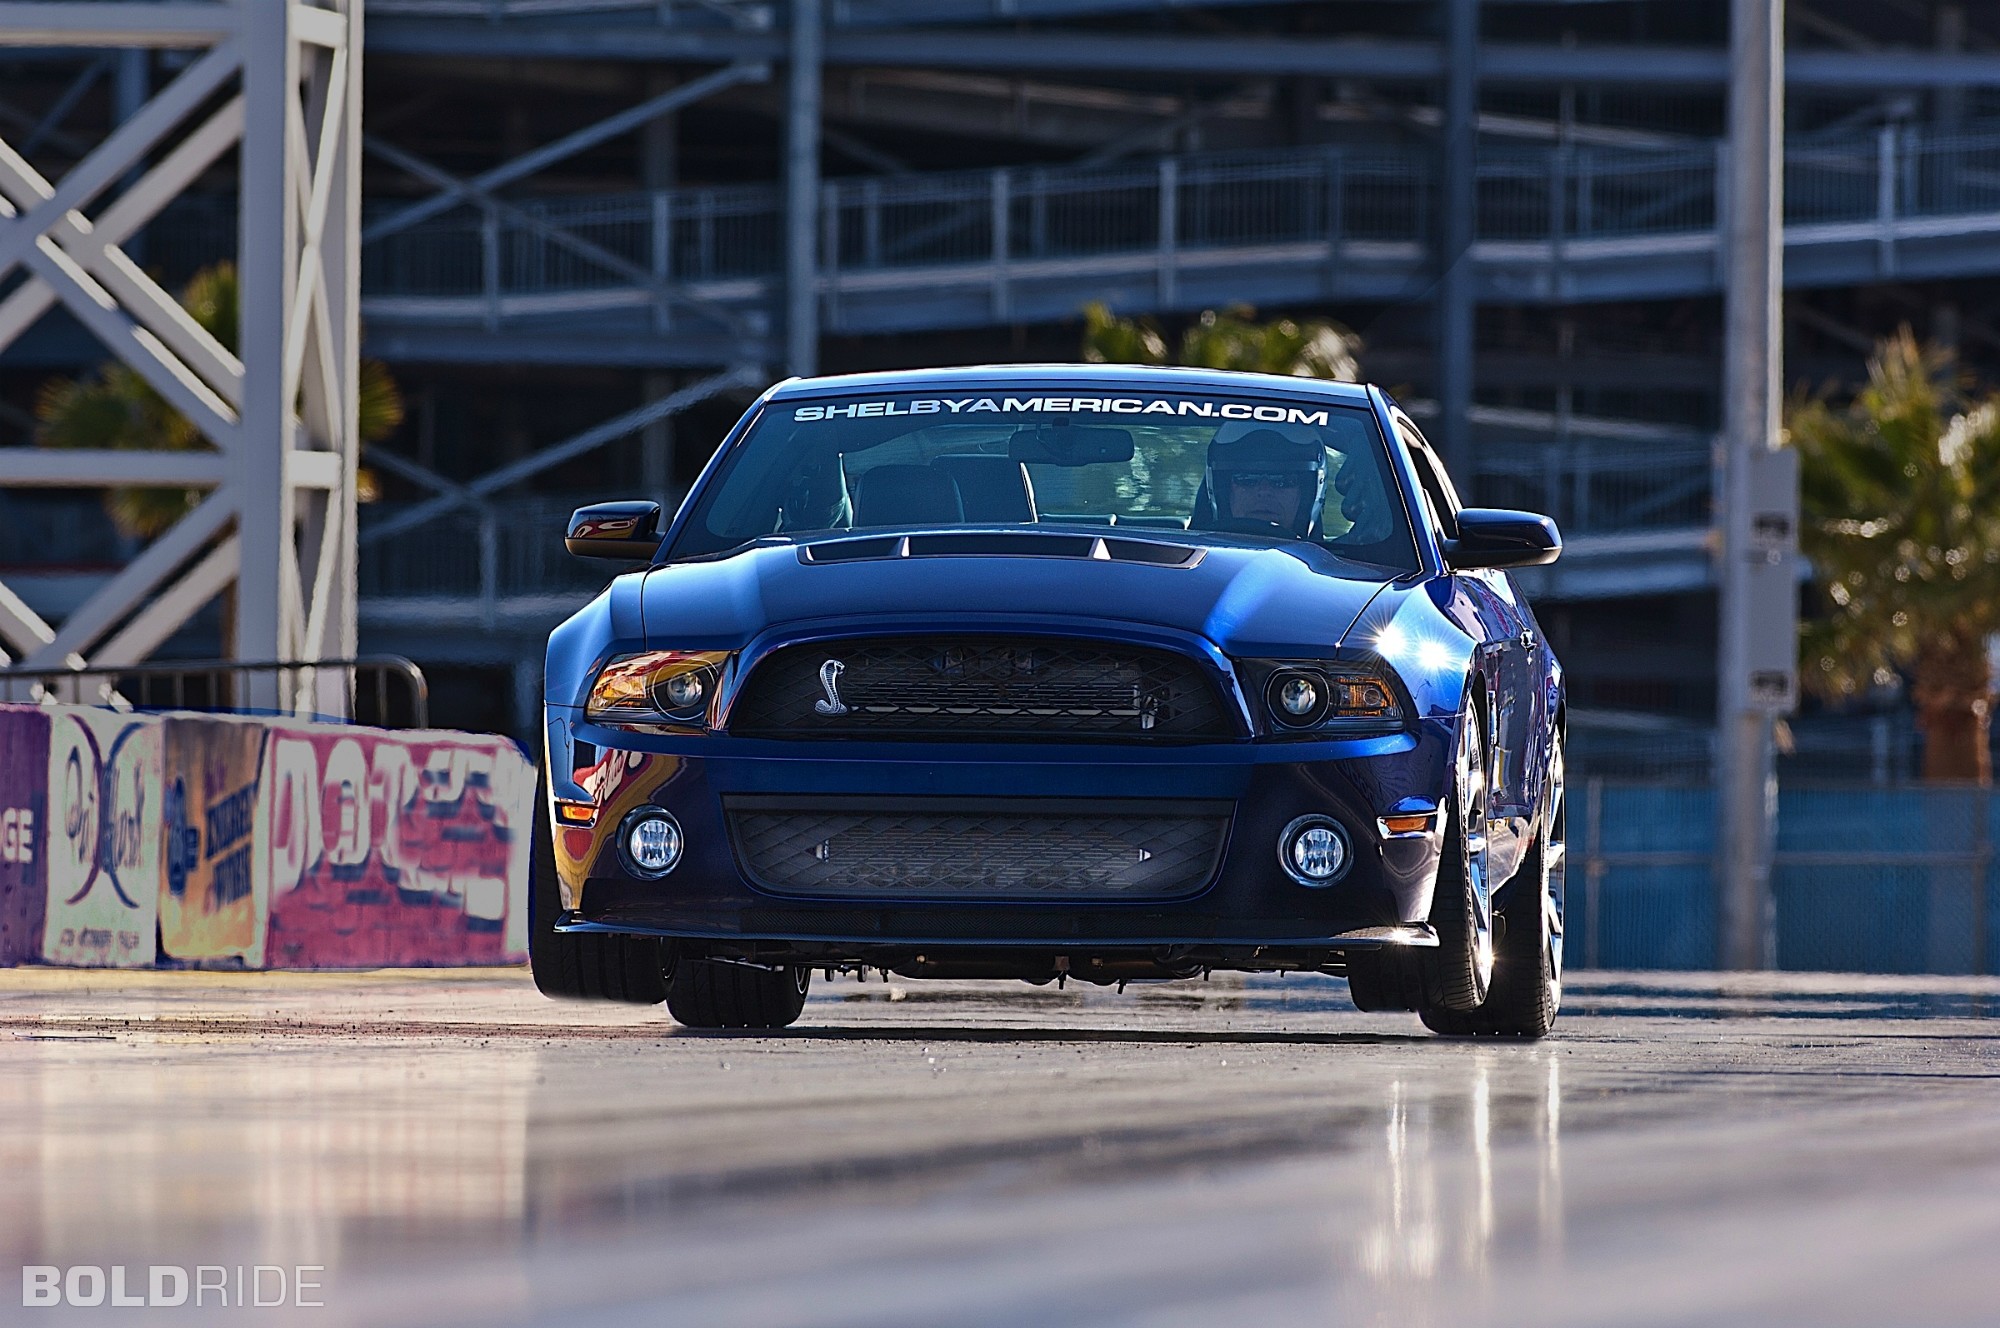 2000x1328 2012 Ford Mustang Shelby 1000 drag racing race car hot rod muscle cars  wallpaper |  | 31877 | WallpaperUP